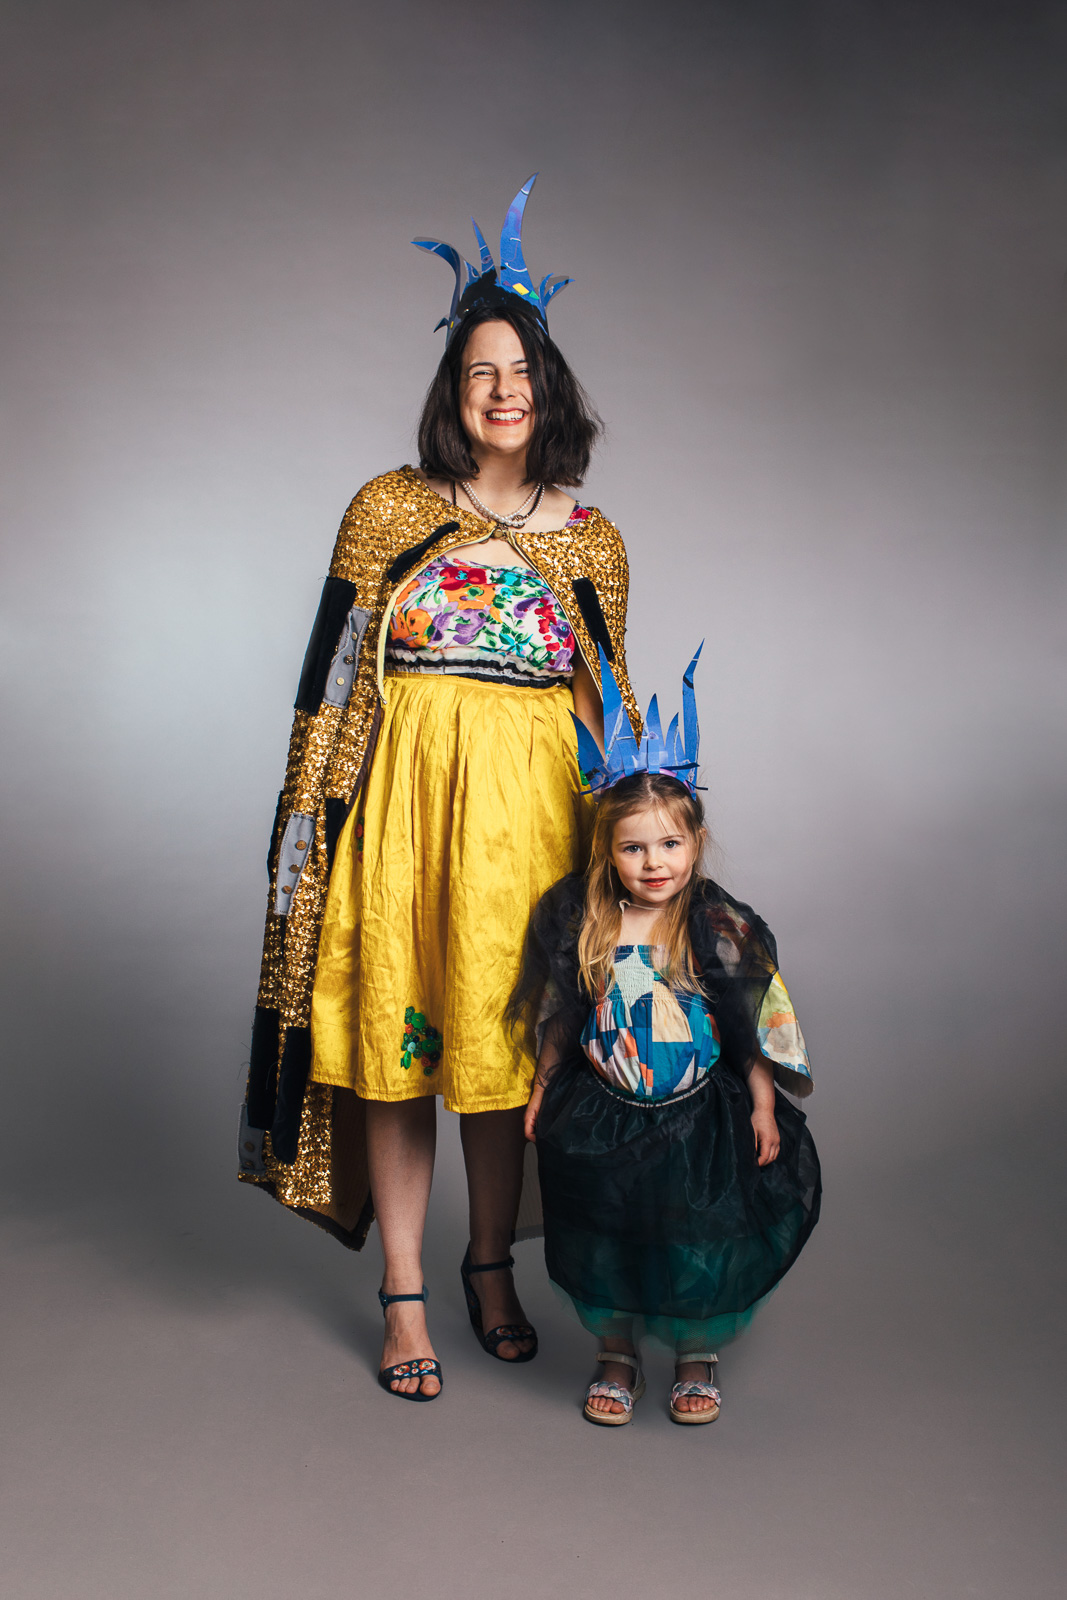 2023 Upcycled Fashion Show portraits by portrait artist, Kerry Struble, of Birch Blaze Studios located in Wakefield, NH. Mother & daughter Disney character-inspired costumes made with upcycled materials. @Birchblaze